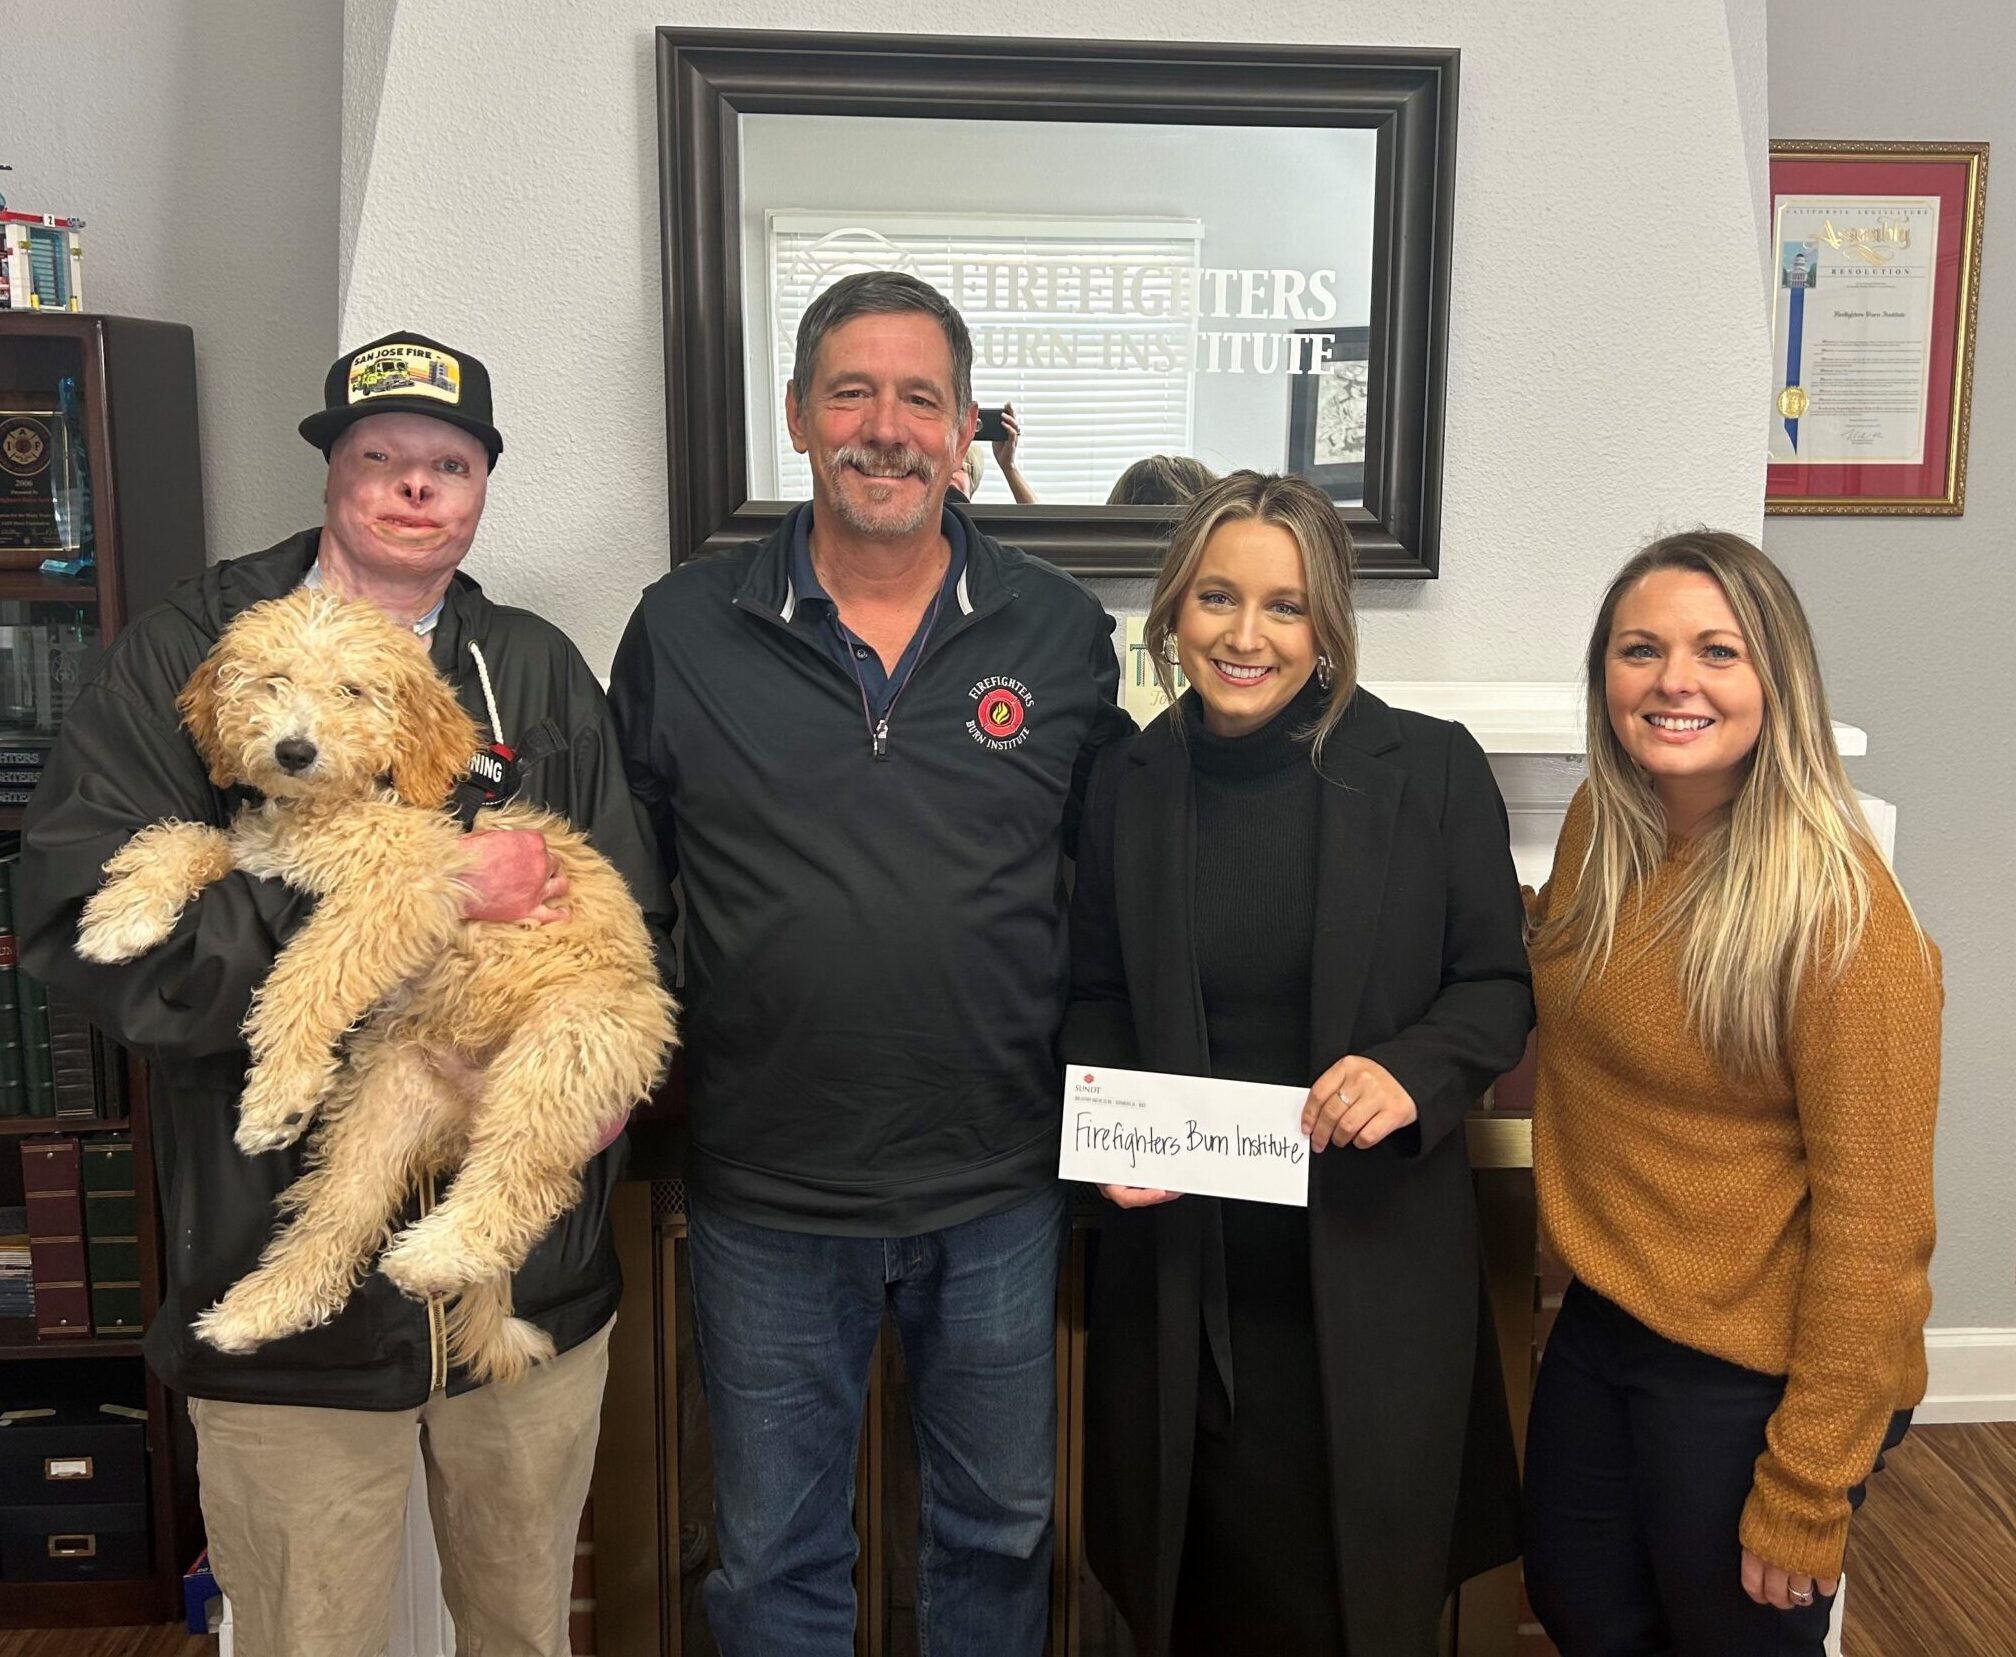 Four people from the Sacramento Firefighters Burn Institute (and one fluffy dog) pose for the camera